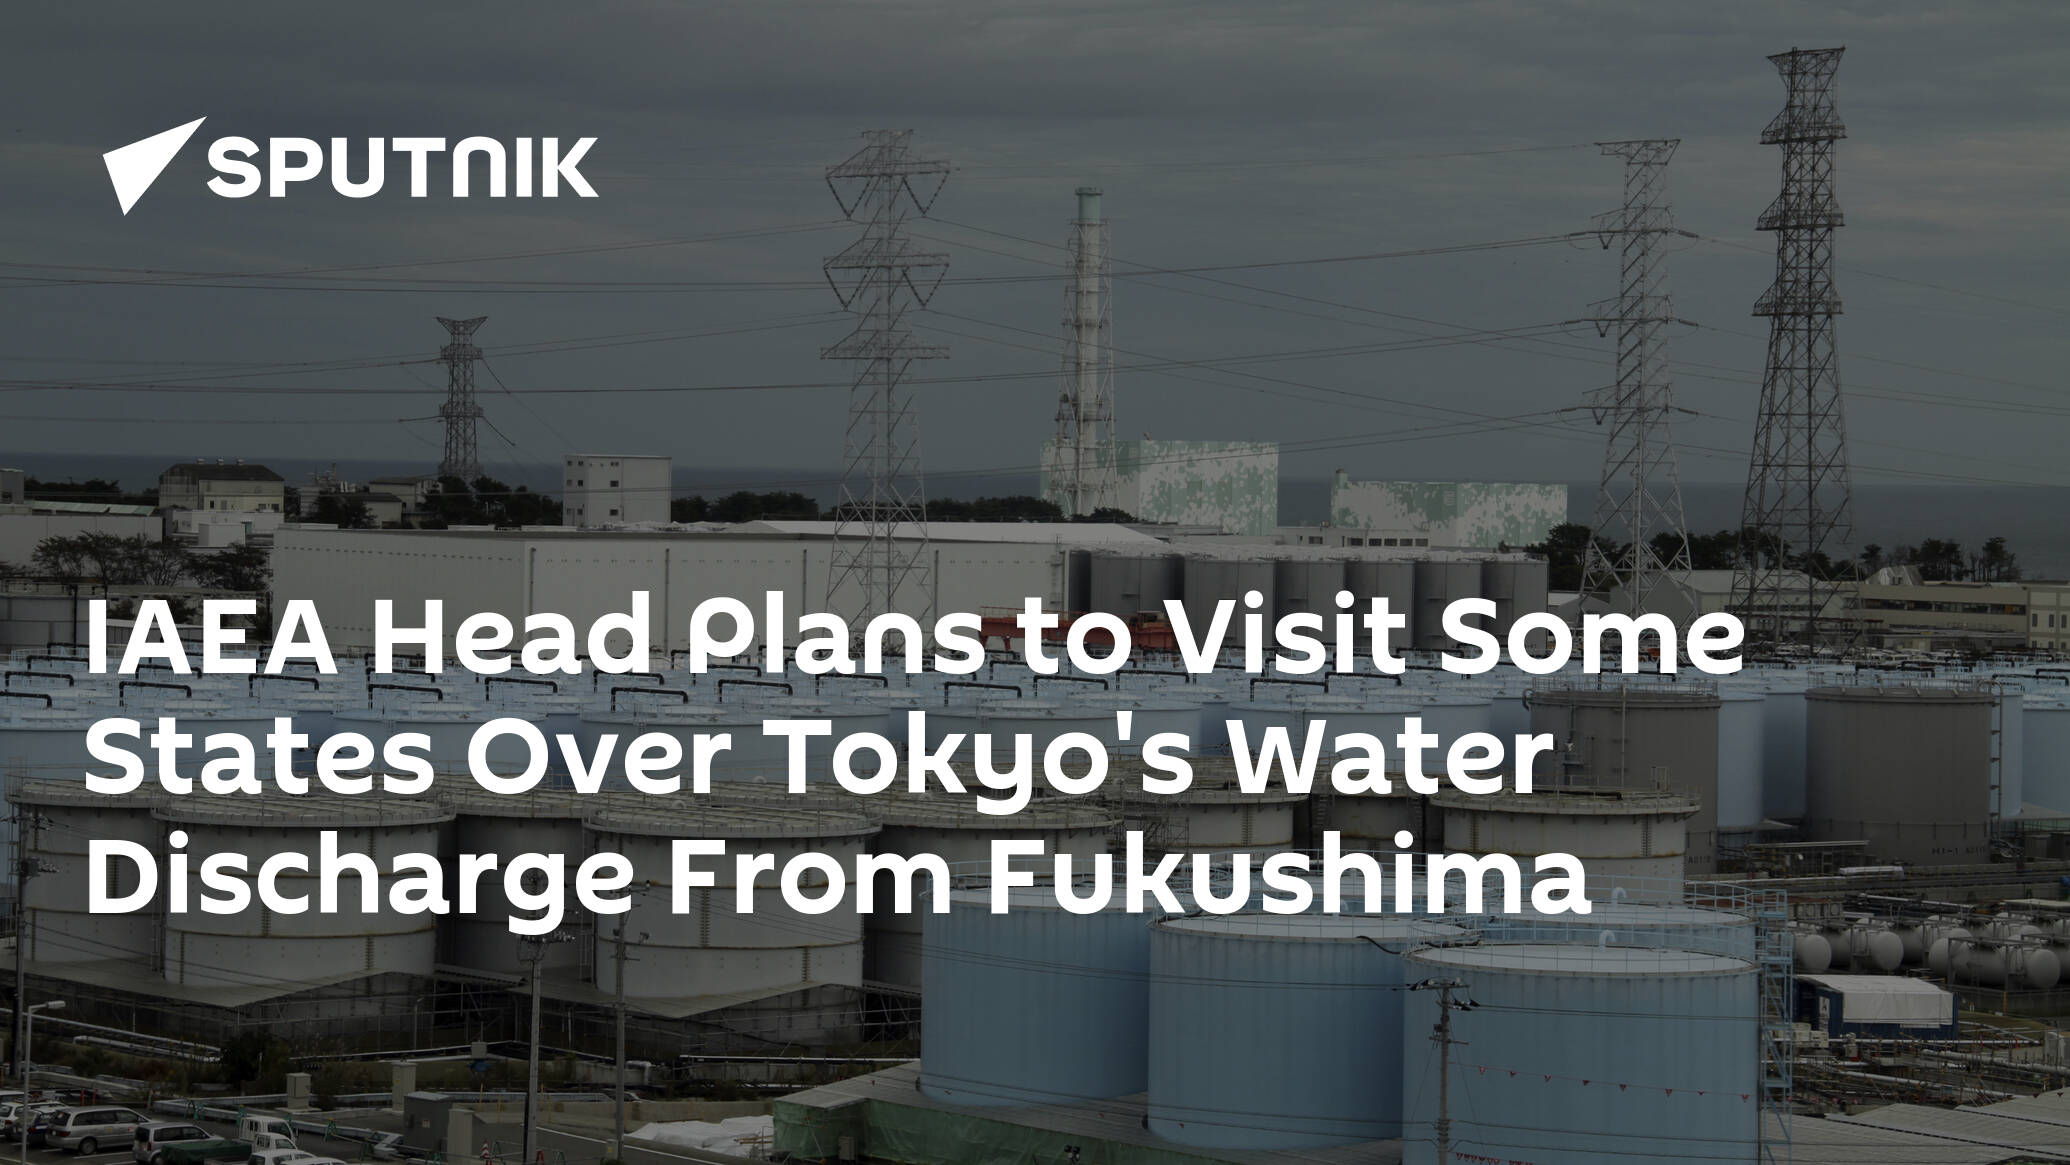 IAEA Head Plans to Visit Some States Over Tokyo's Water Discharge From Fukushima